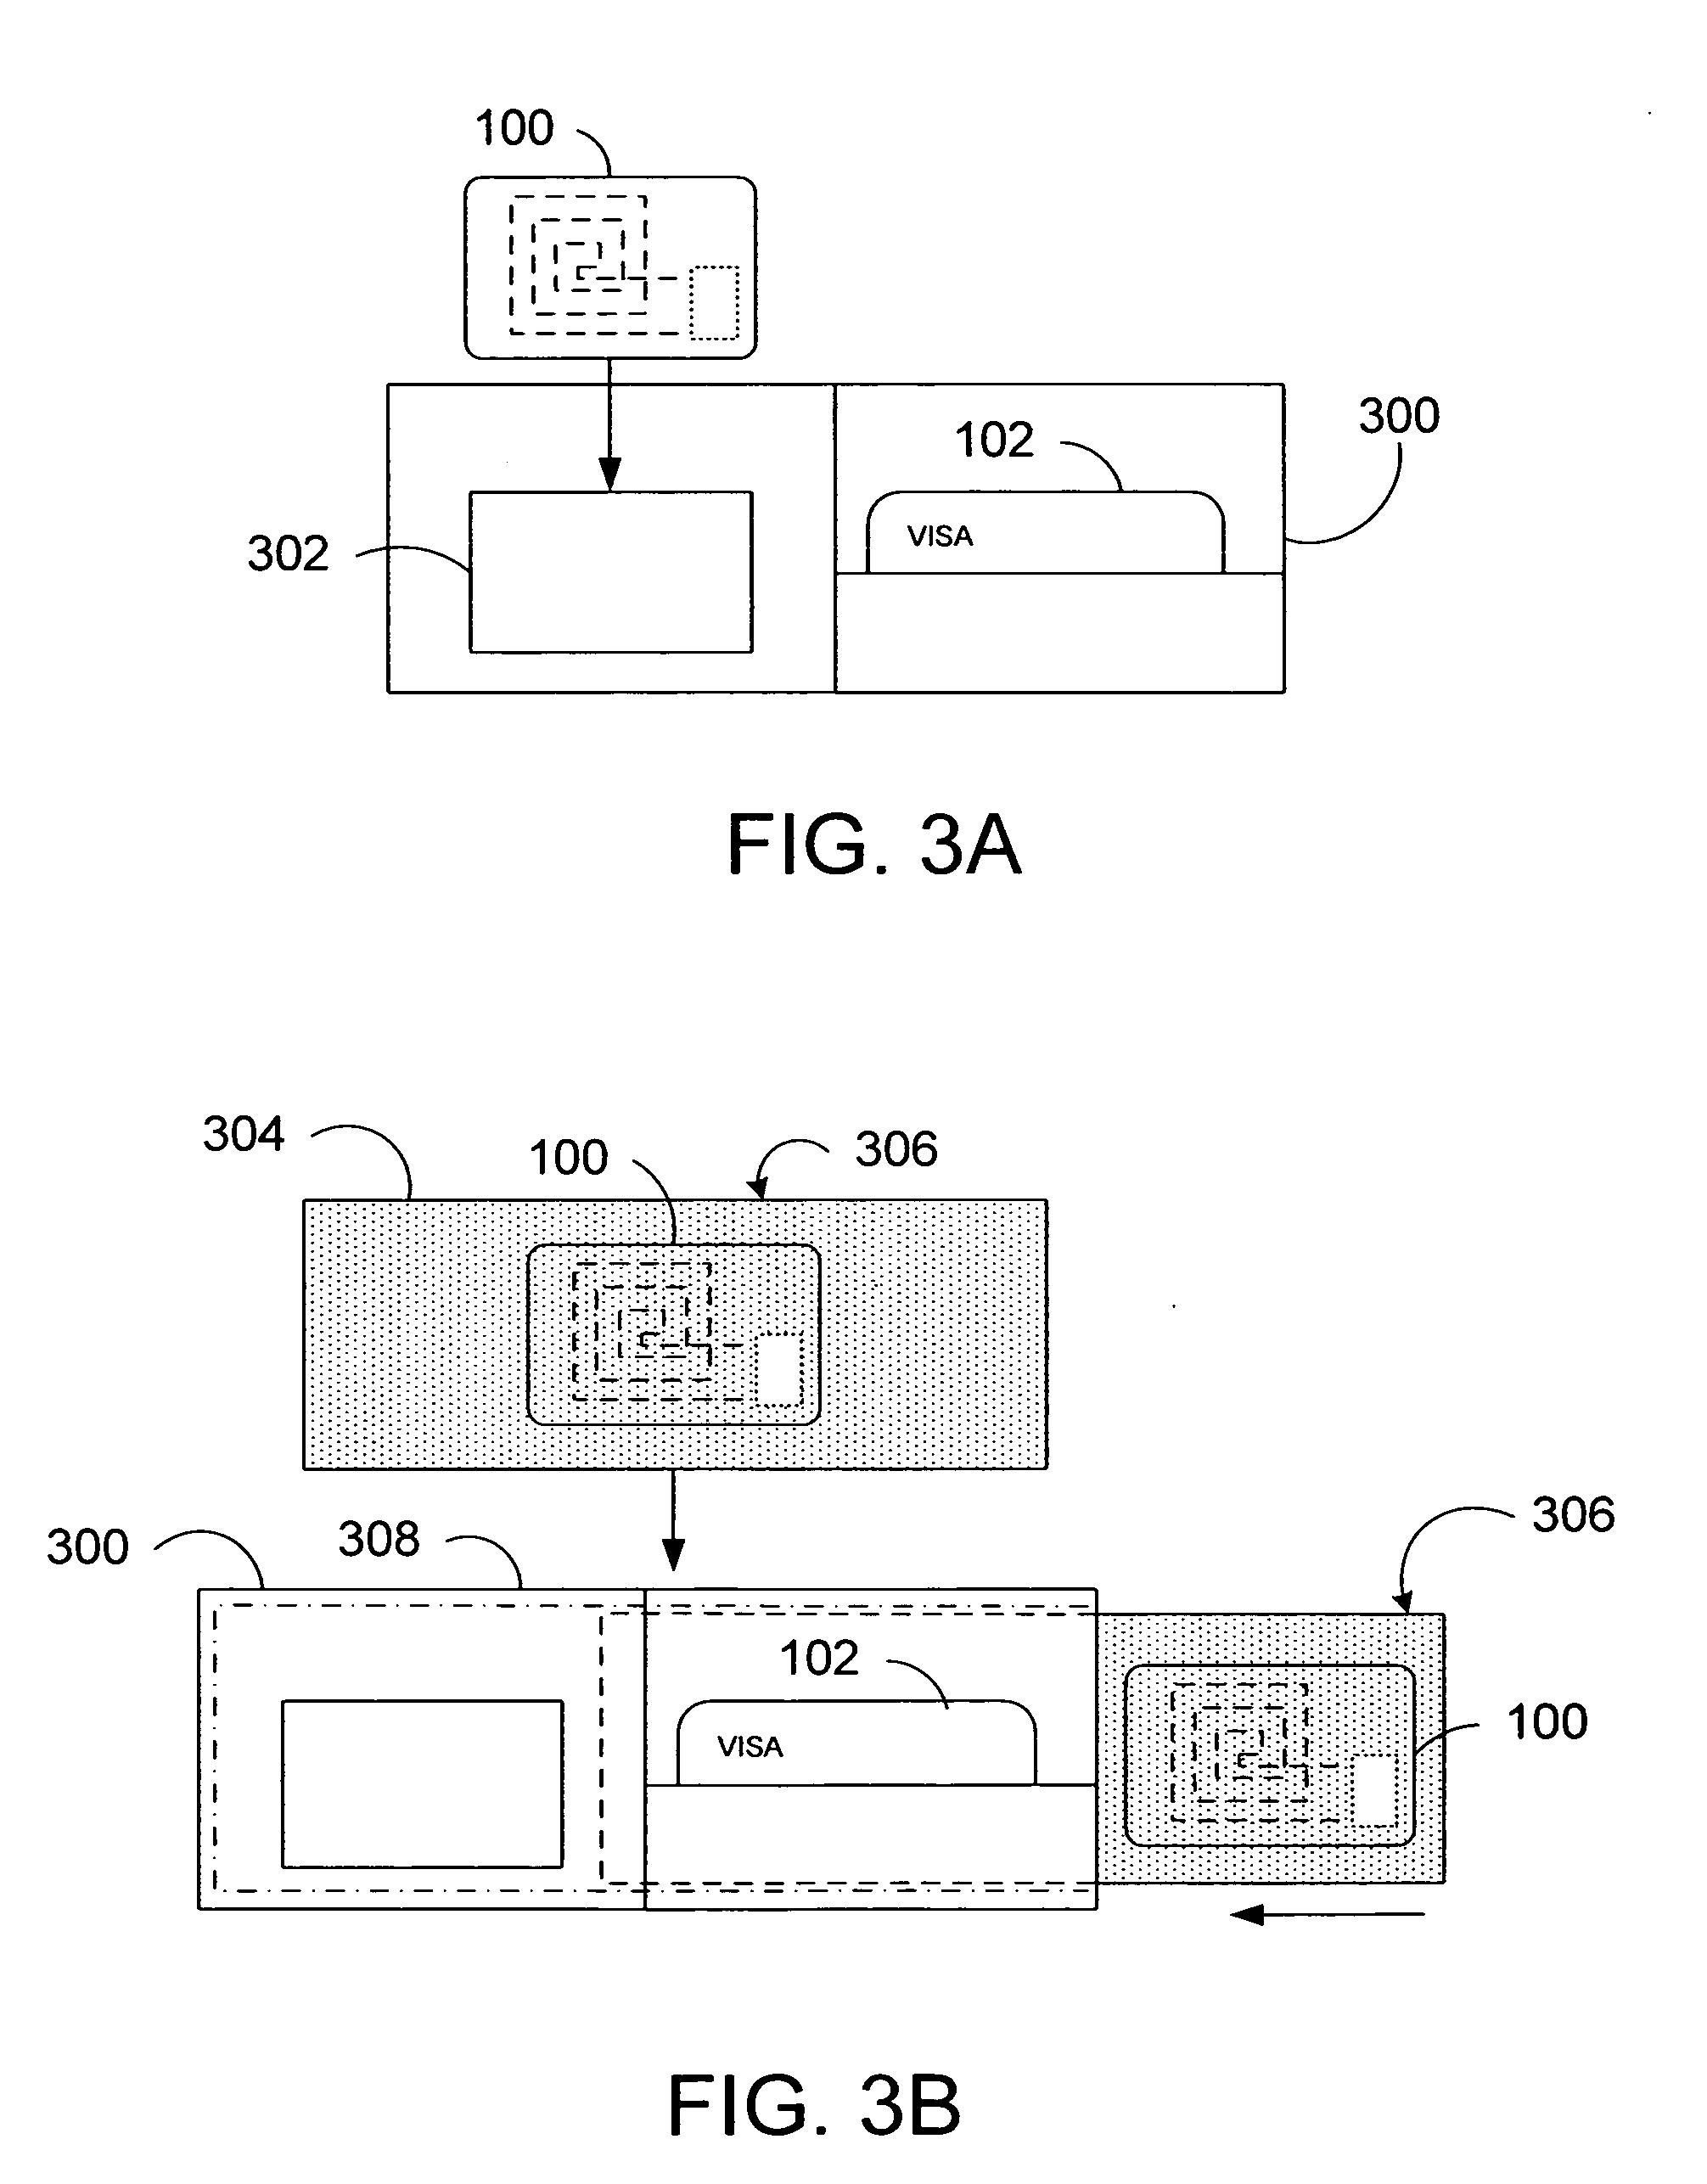 Apparatus and method for preventing wireless interrogation of portable consumer devices